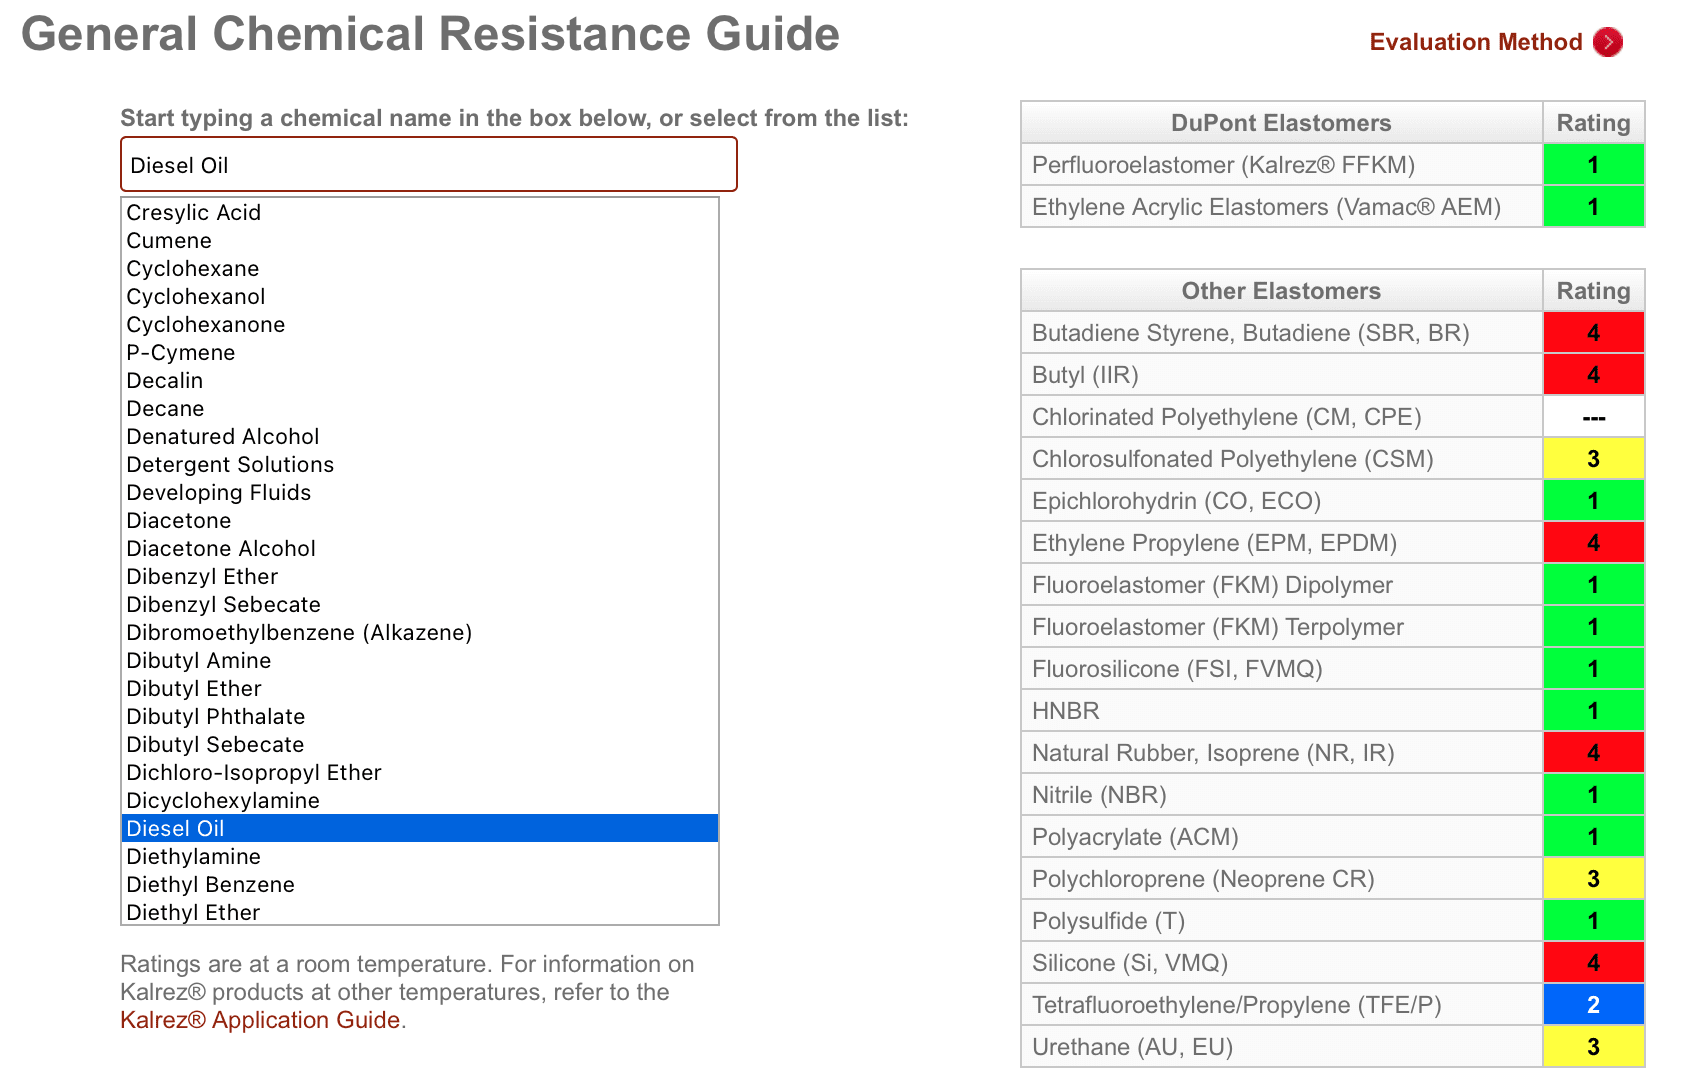 Screenshot of the DuPont Chemical Capability Guide Website